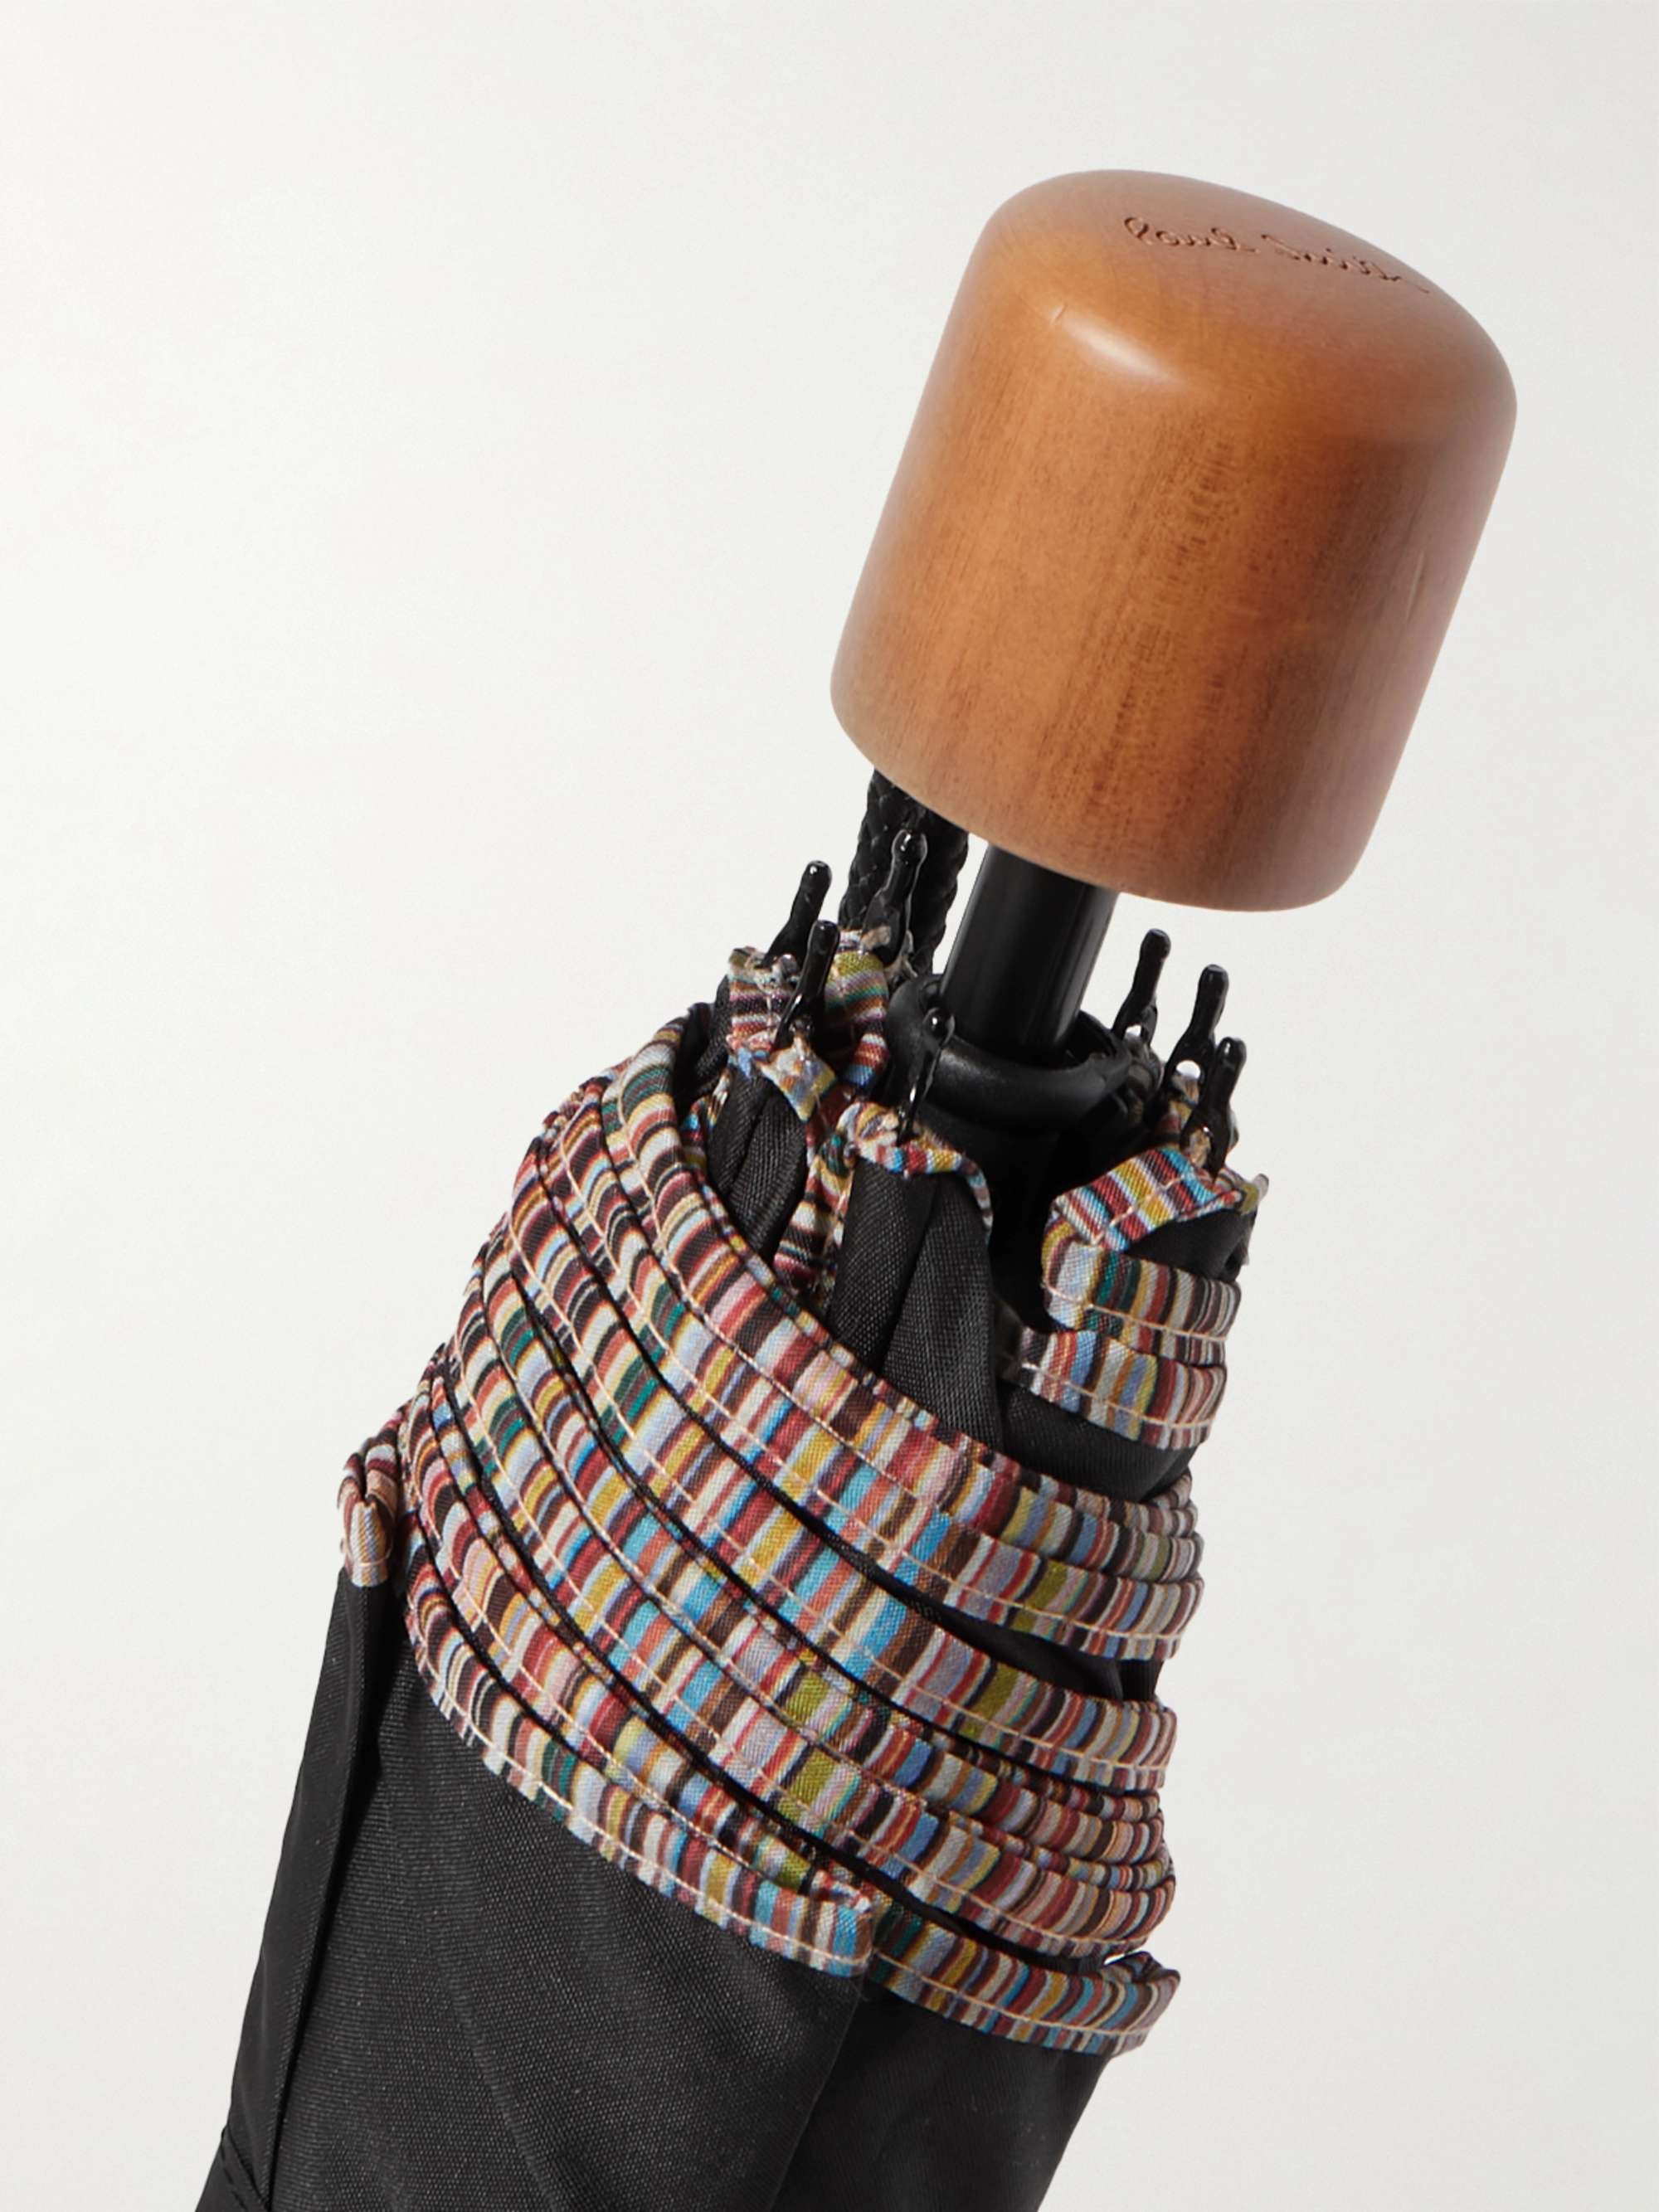 PAUL SMITH Contrast-Tipped Wood-Handle Fold-Up Umbrella